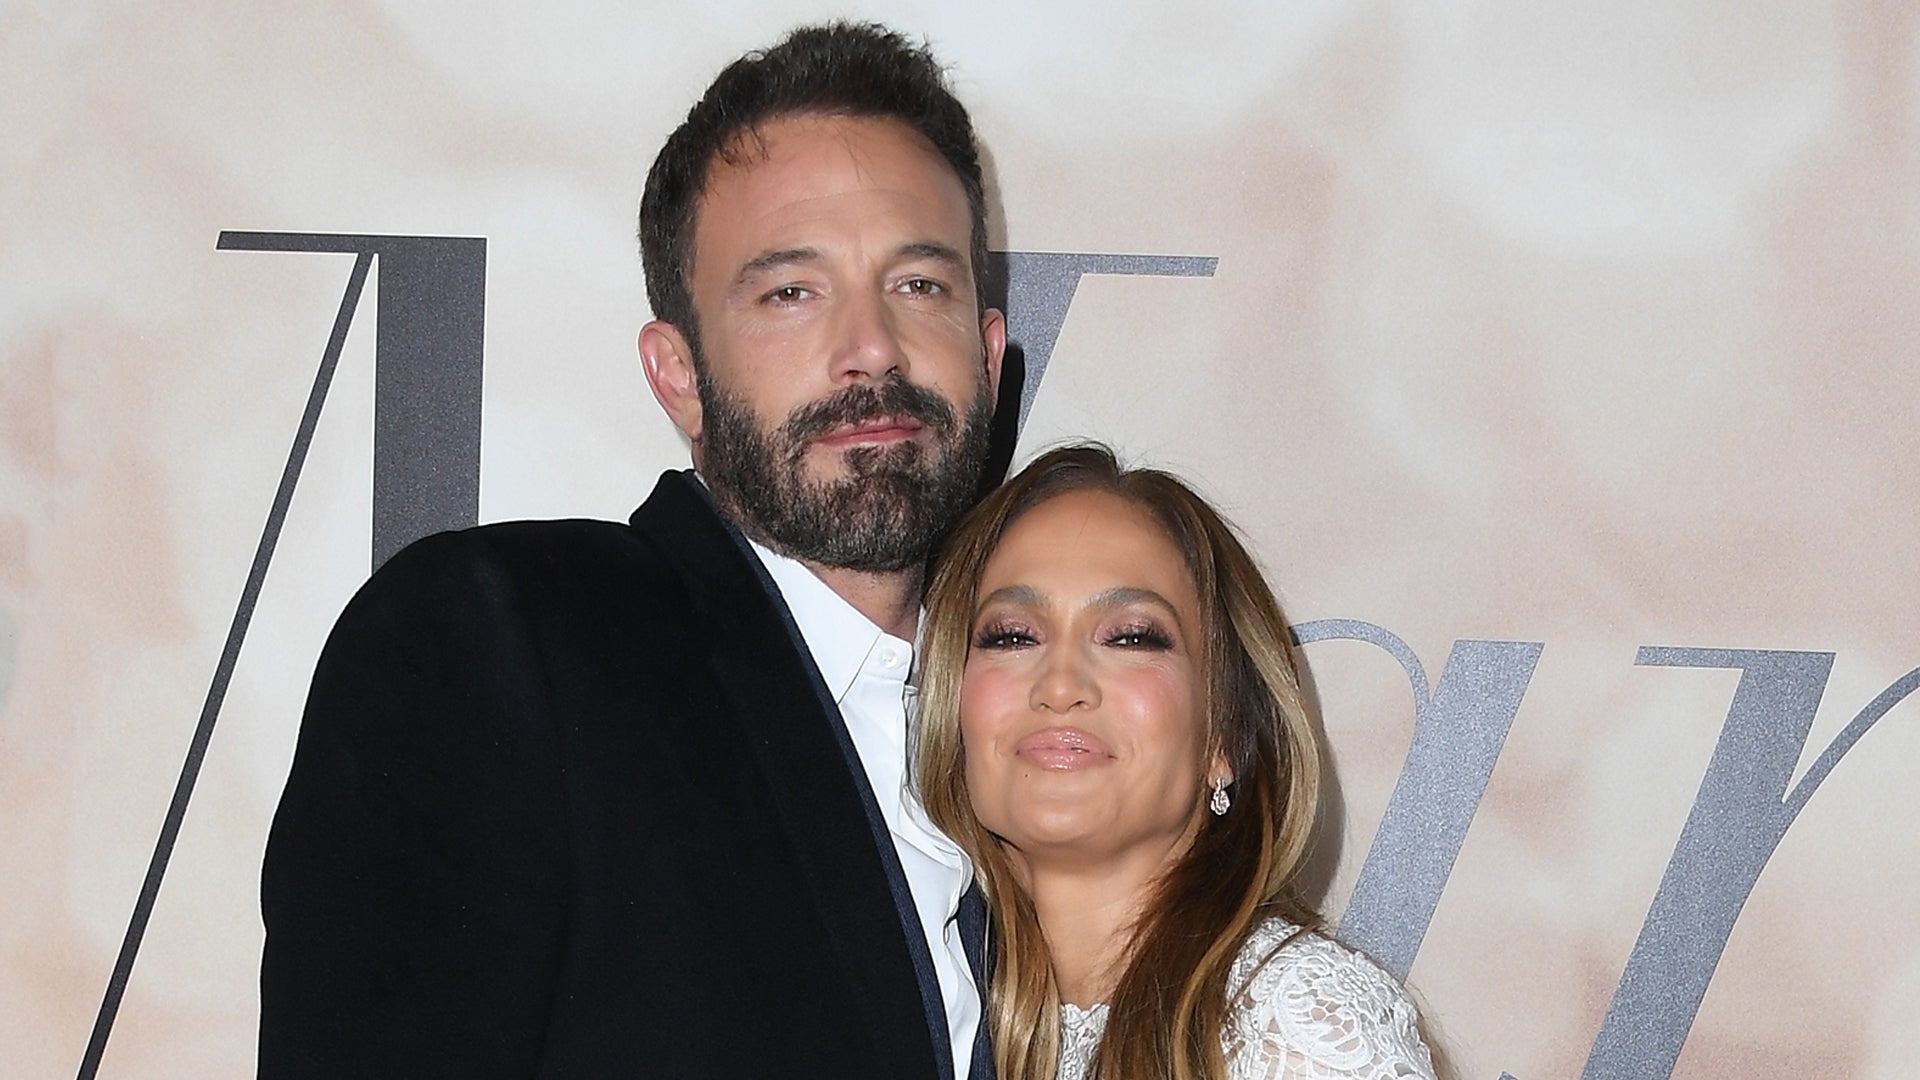 Ben Affleck and Jennifer Lopez React to 'Diva' Claims in New Documentary